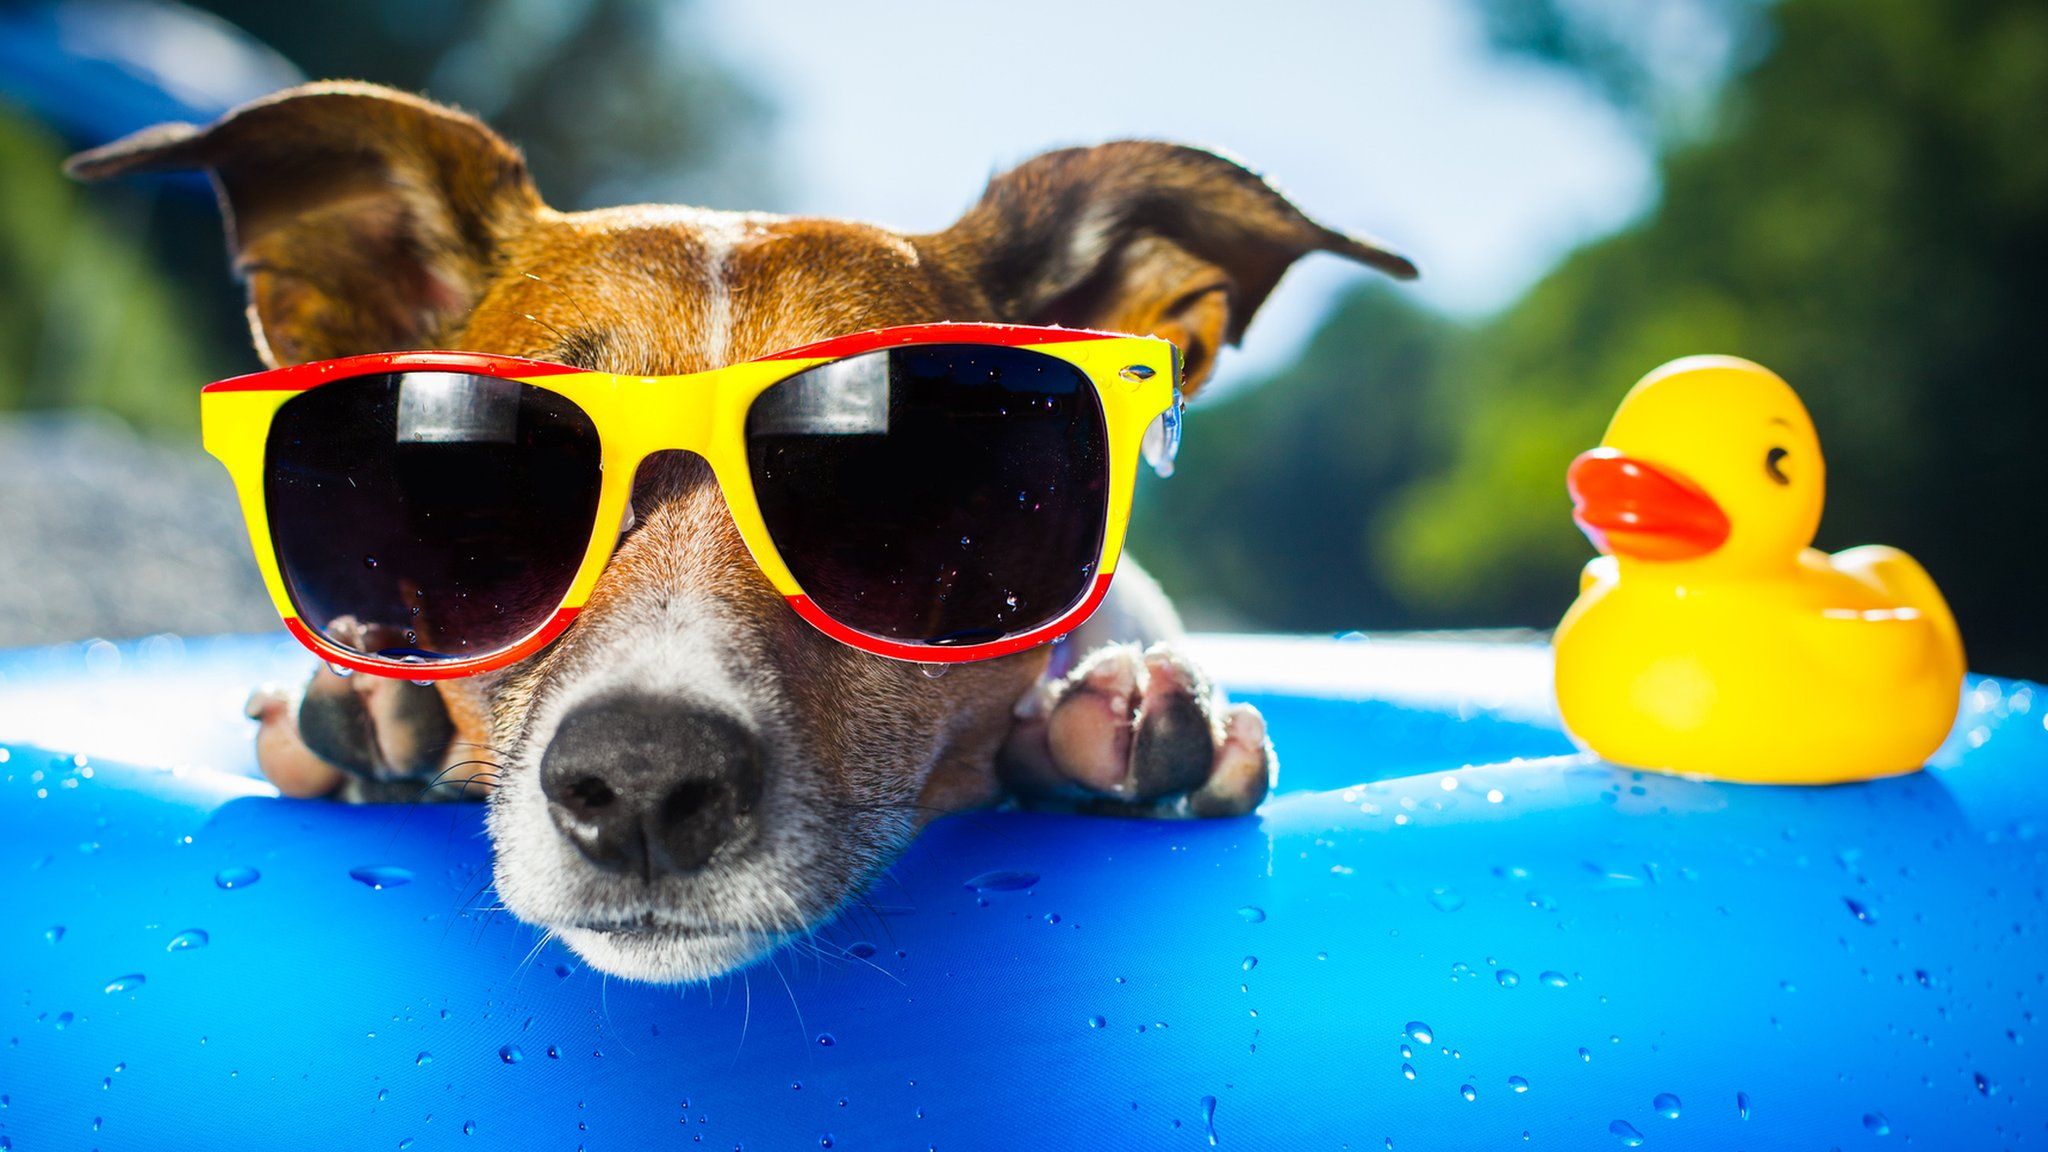 Dog in sunglasses with yellow rubber duck